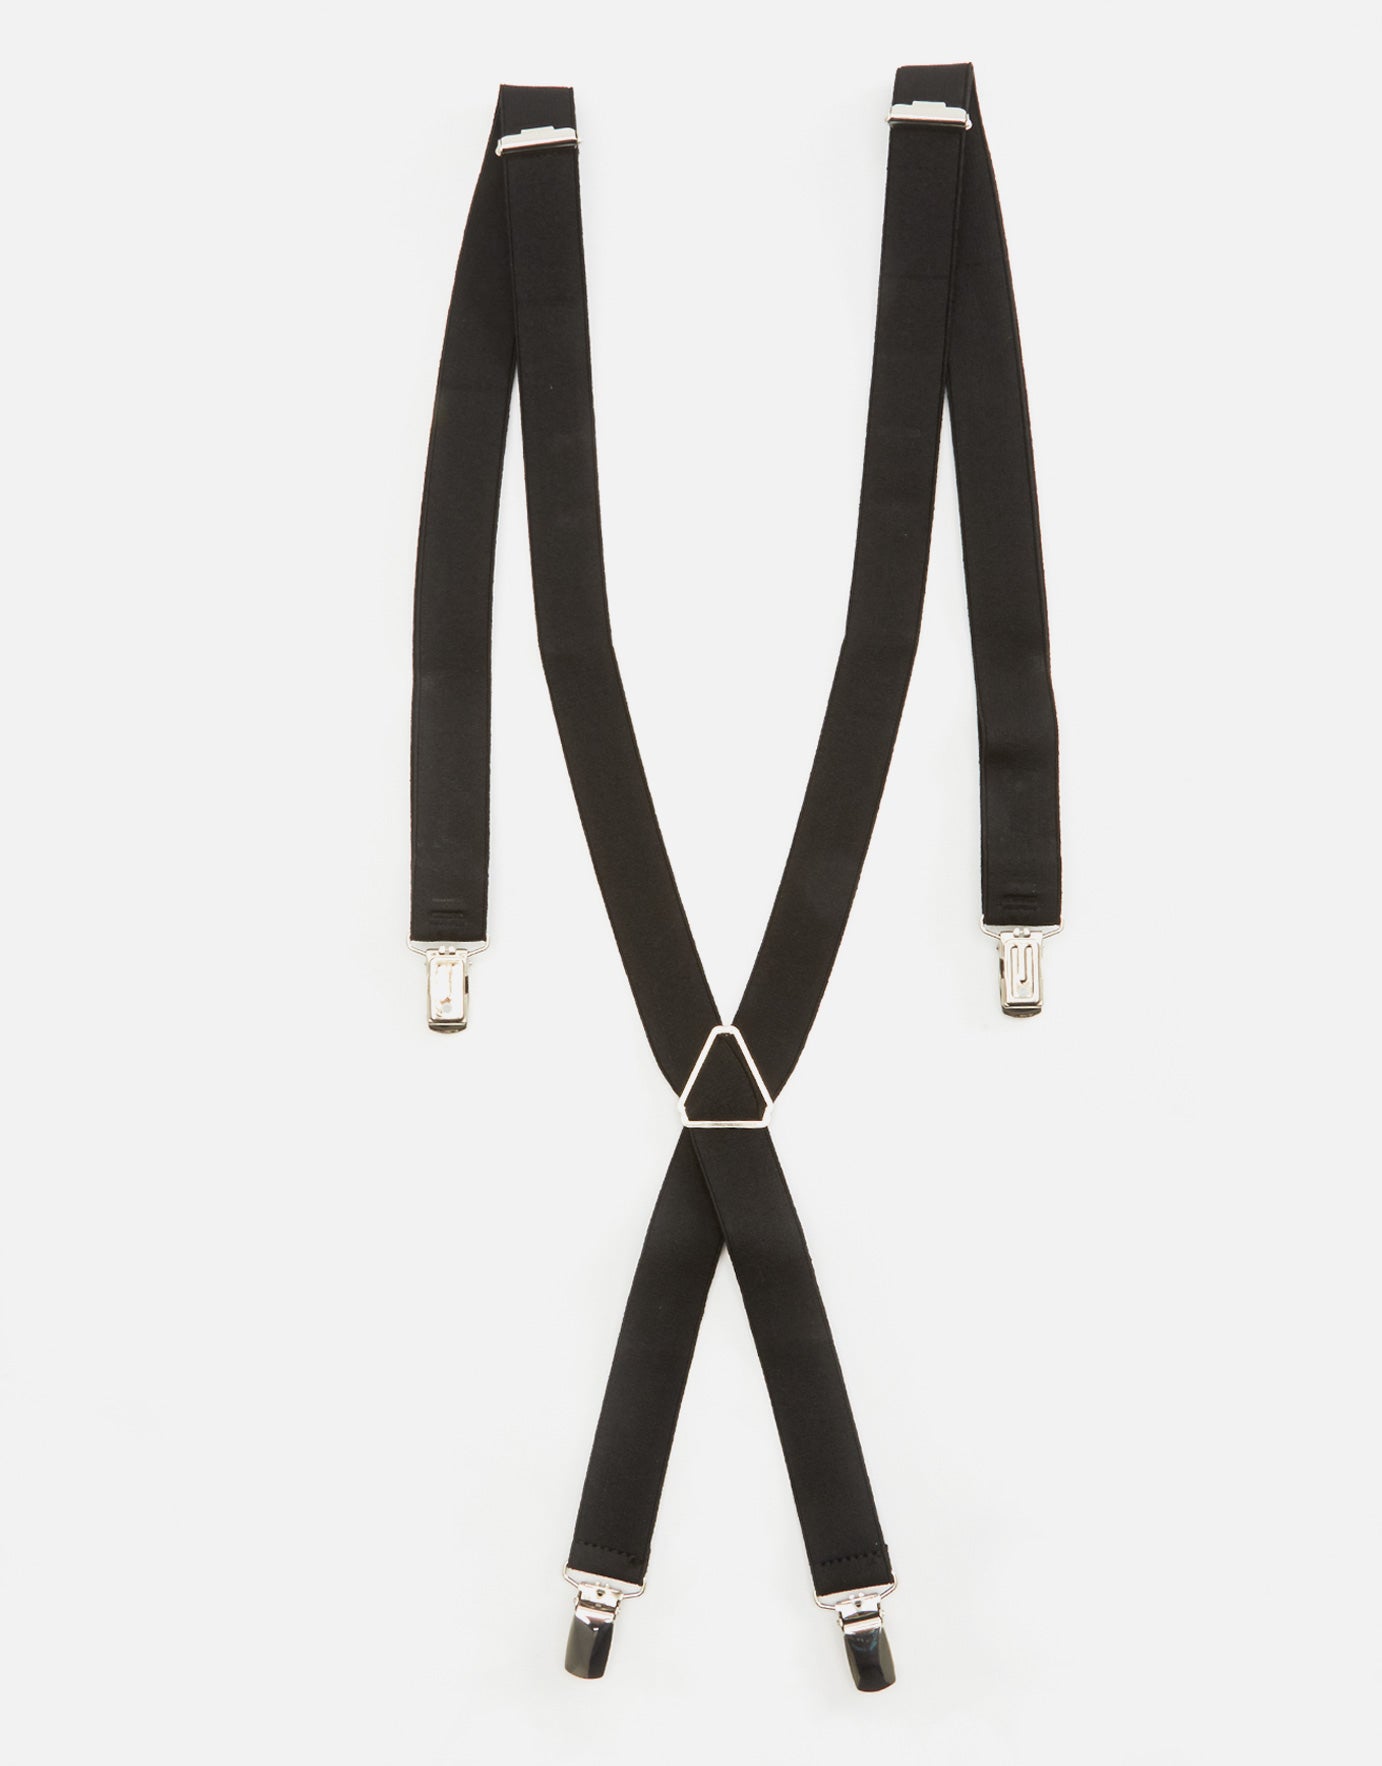 How to Make Suspenders with Pictures  wikiHow